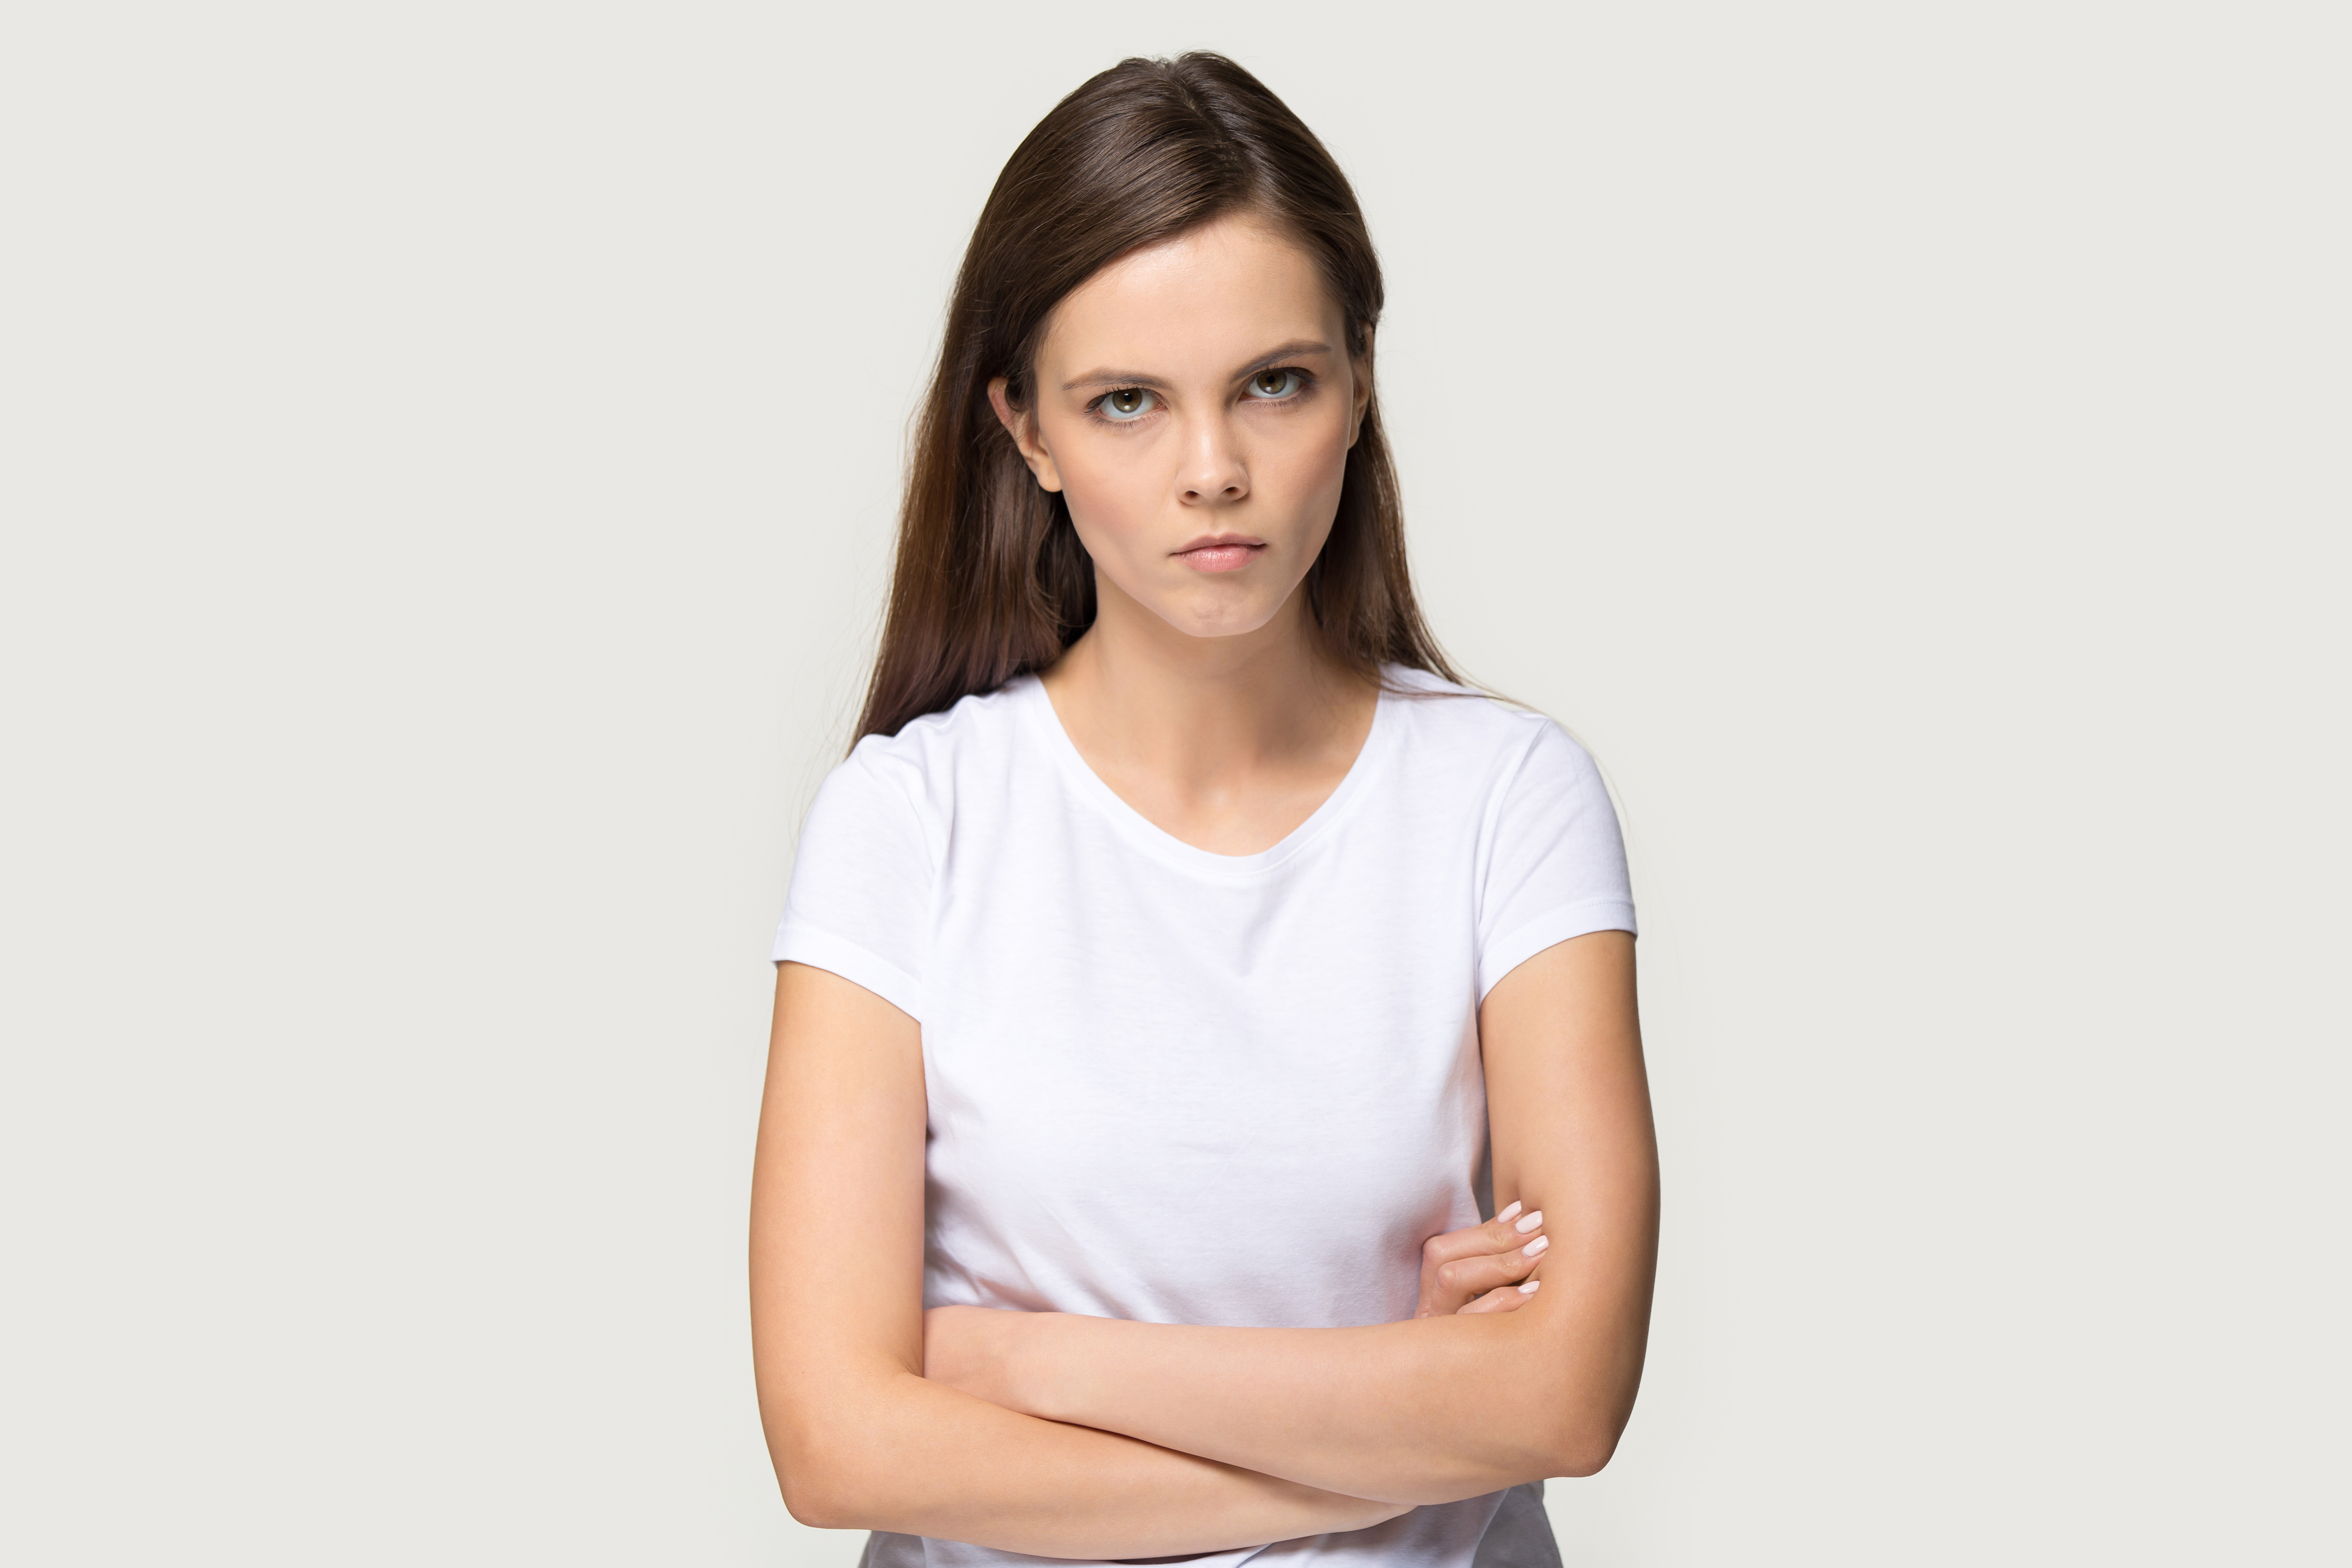 An angry young woman | Source: Shutterstock